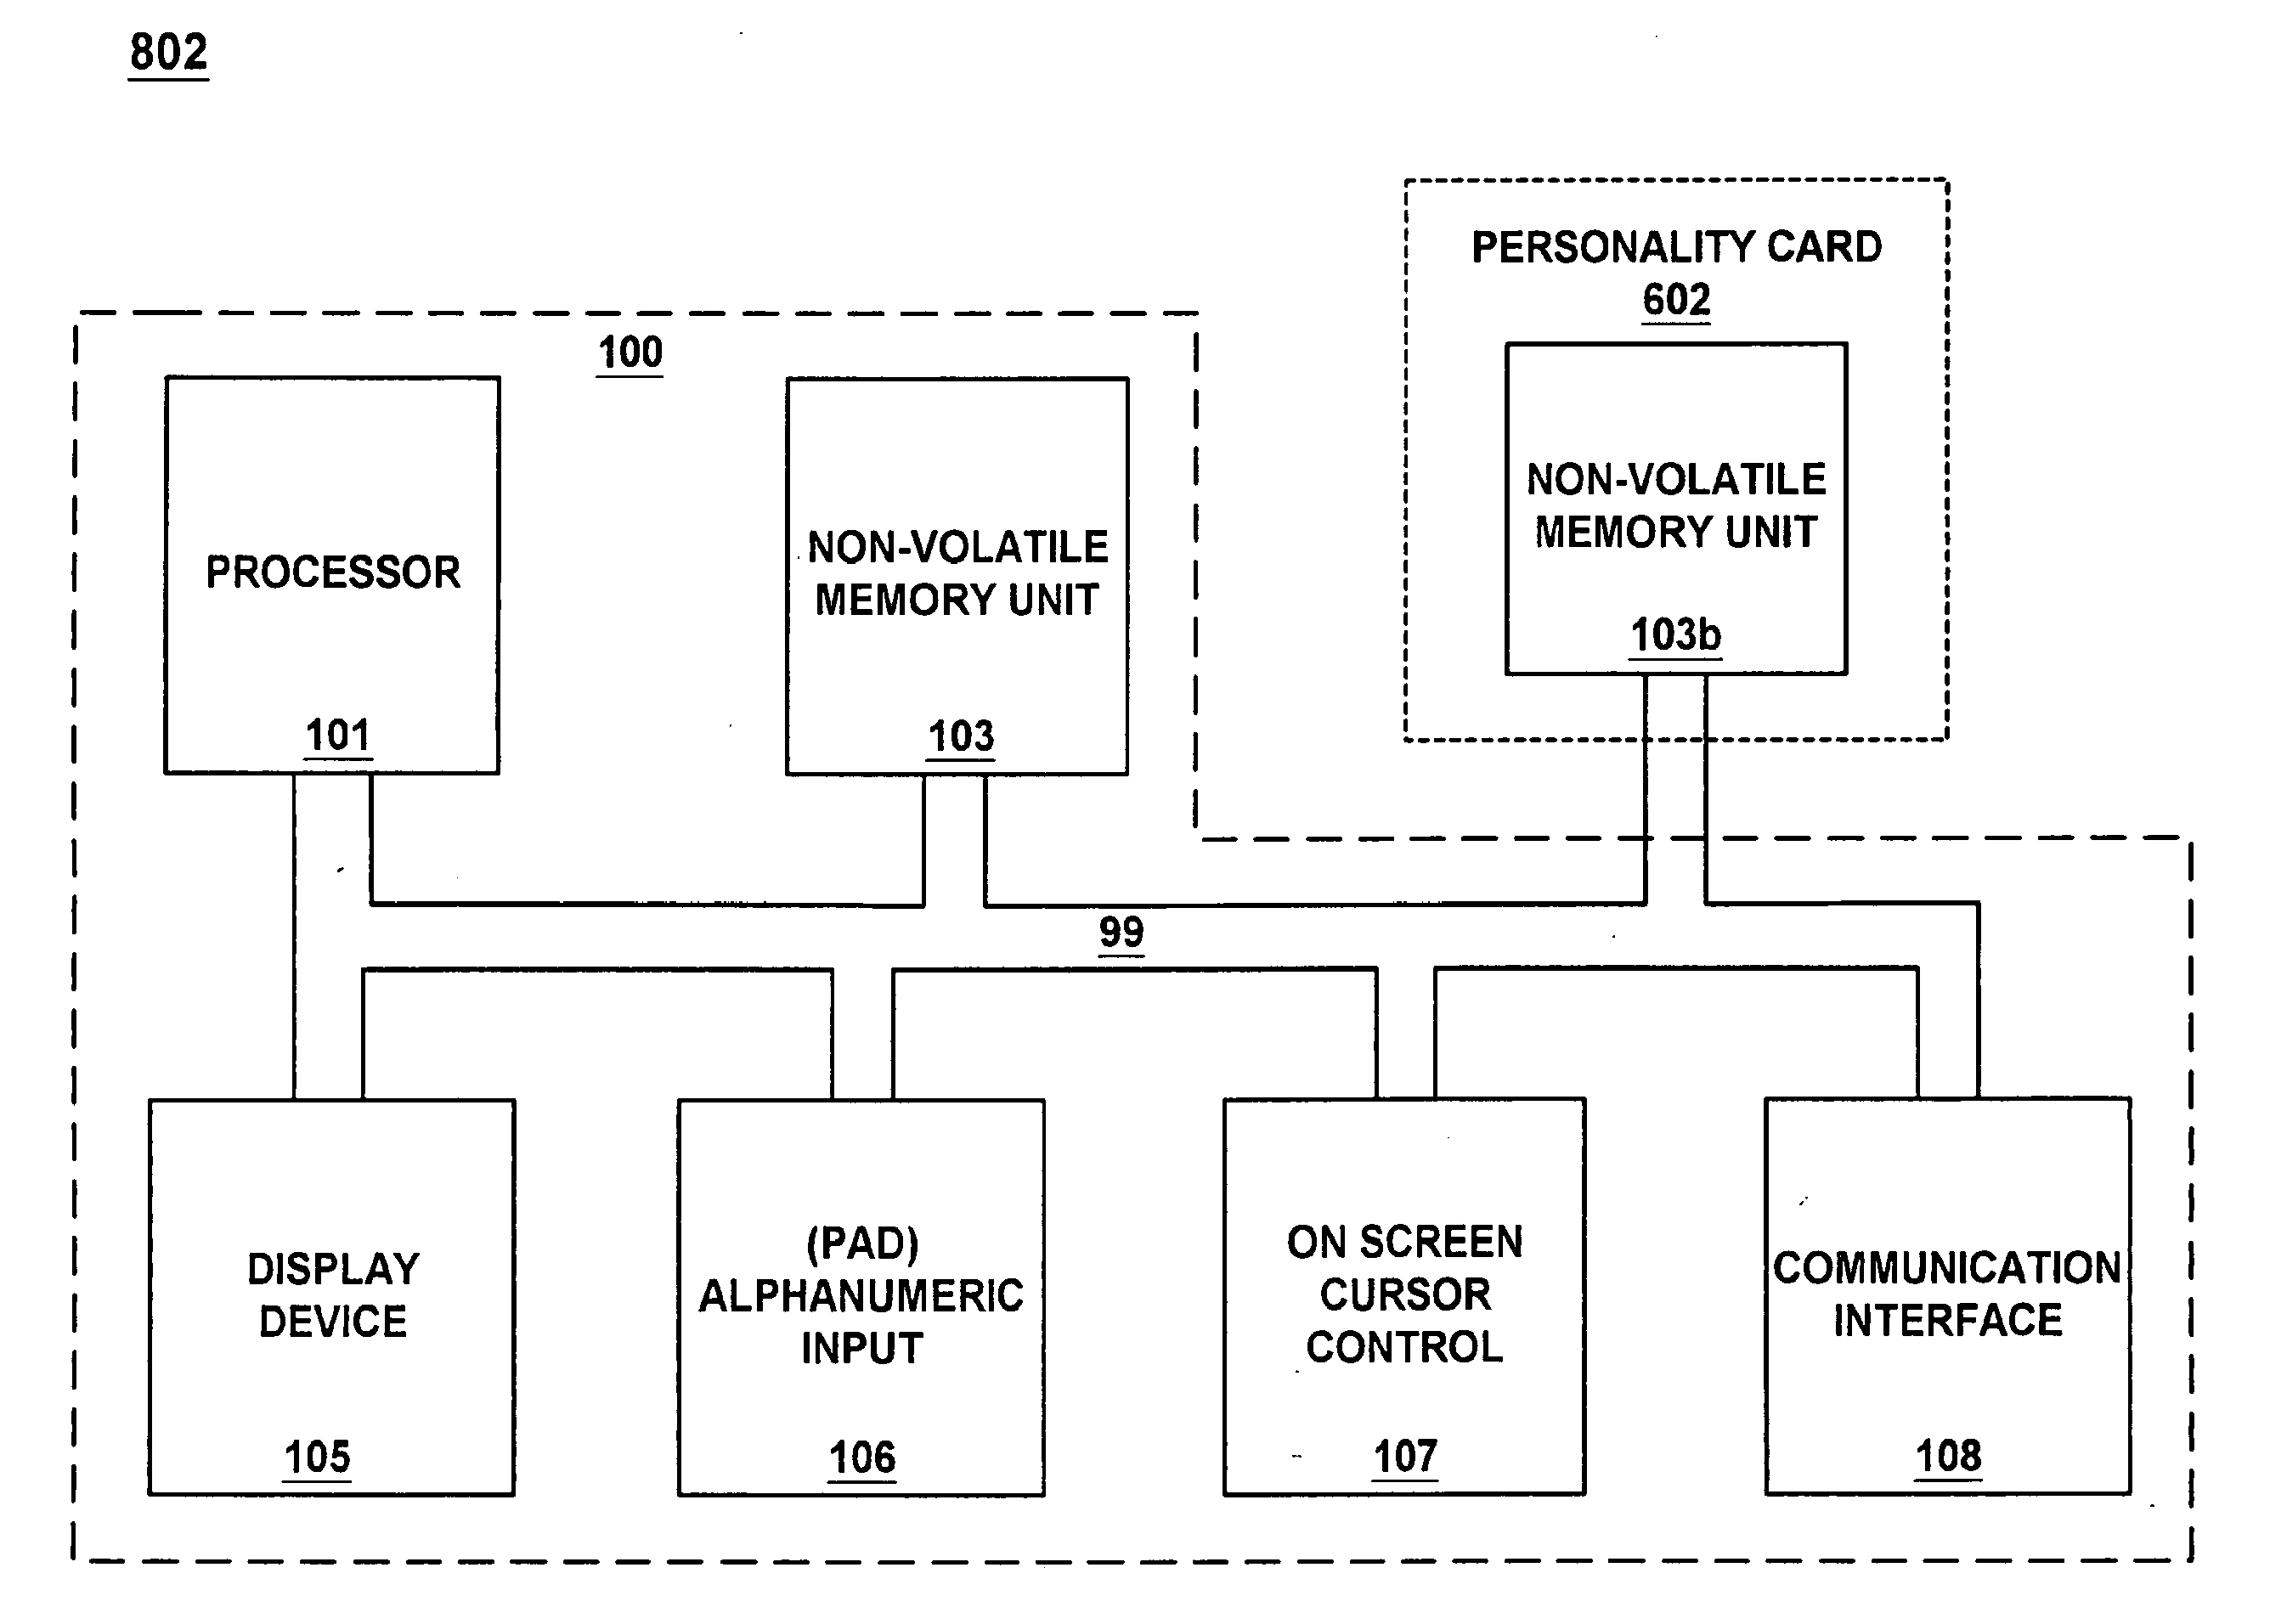 Method and system for enabling personal digital assistants and protecting stored private data